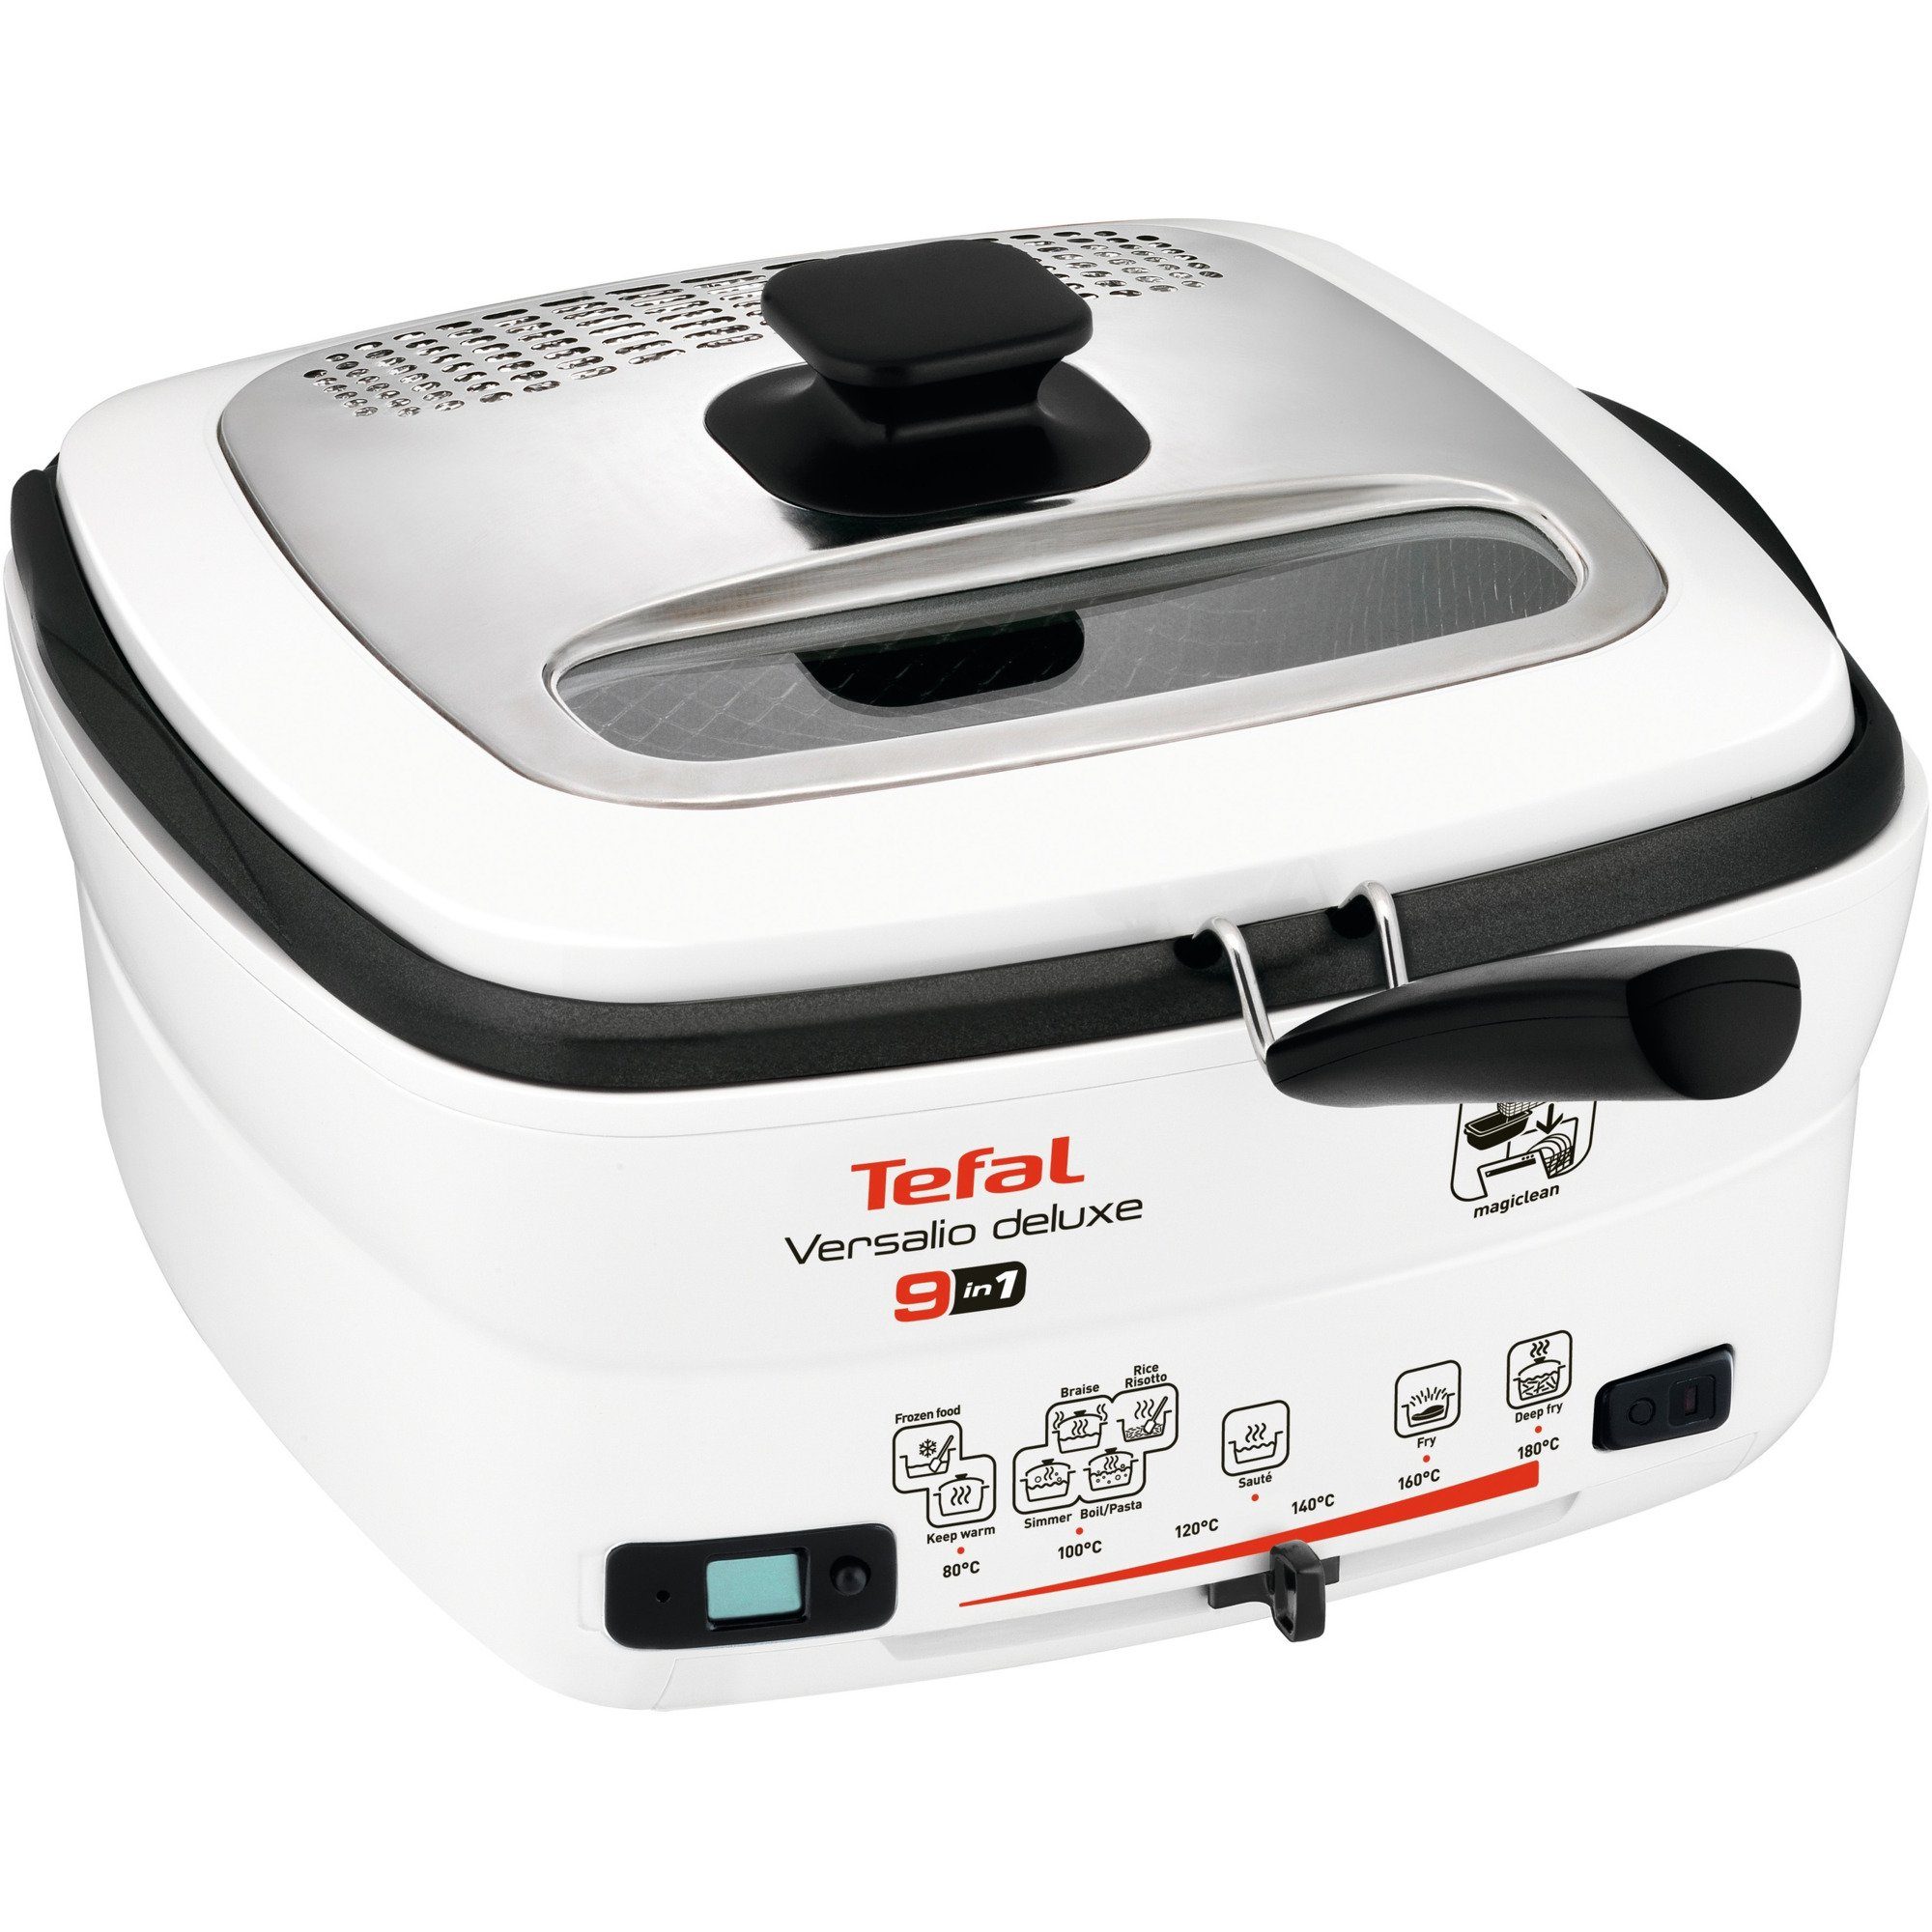 Tefal Fritteuse 9-in-1 Multifunktions-Fritteuse Versalio Deluxe